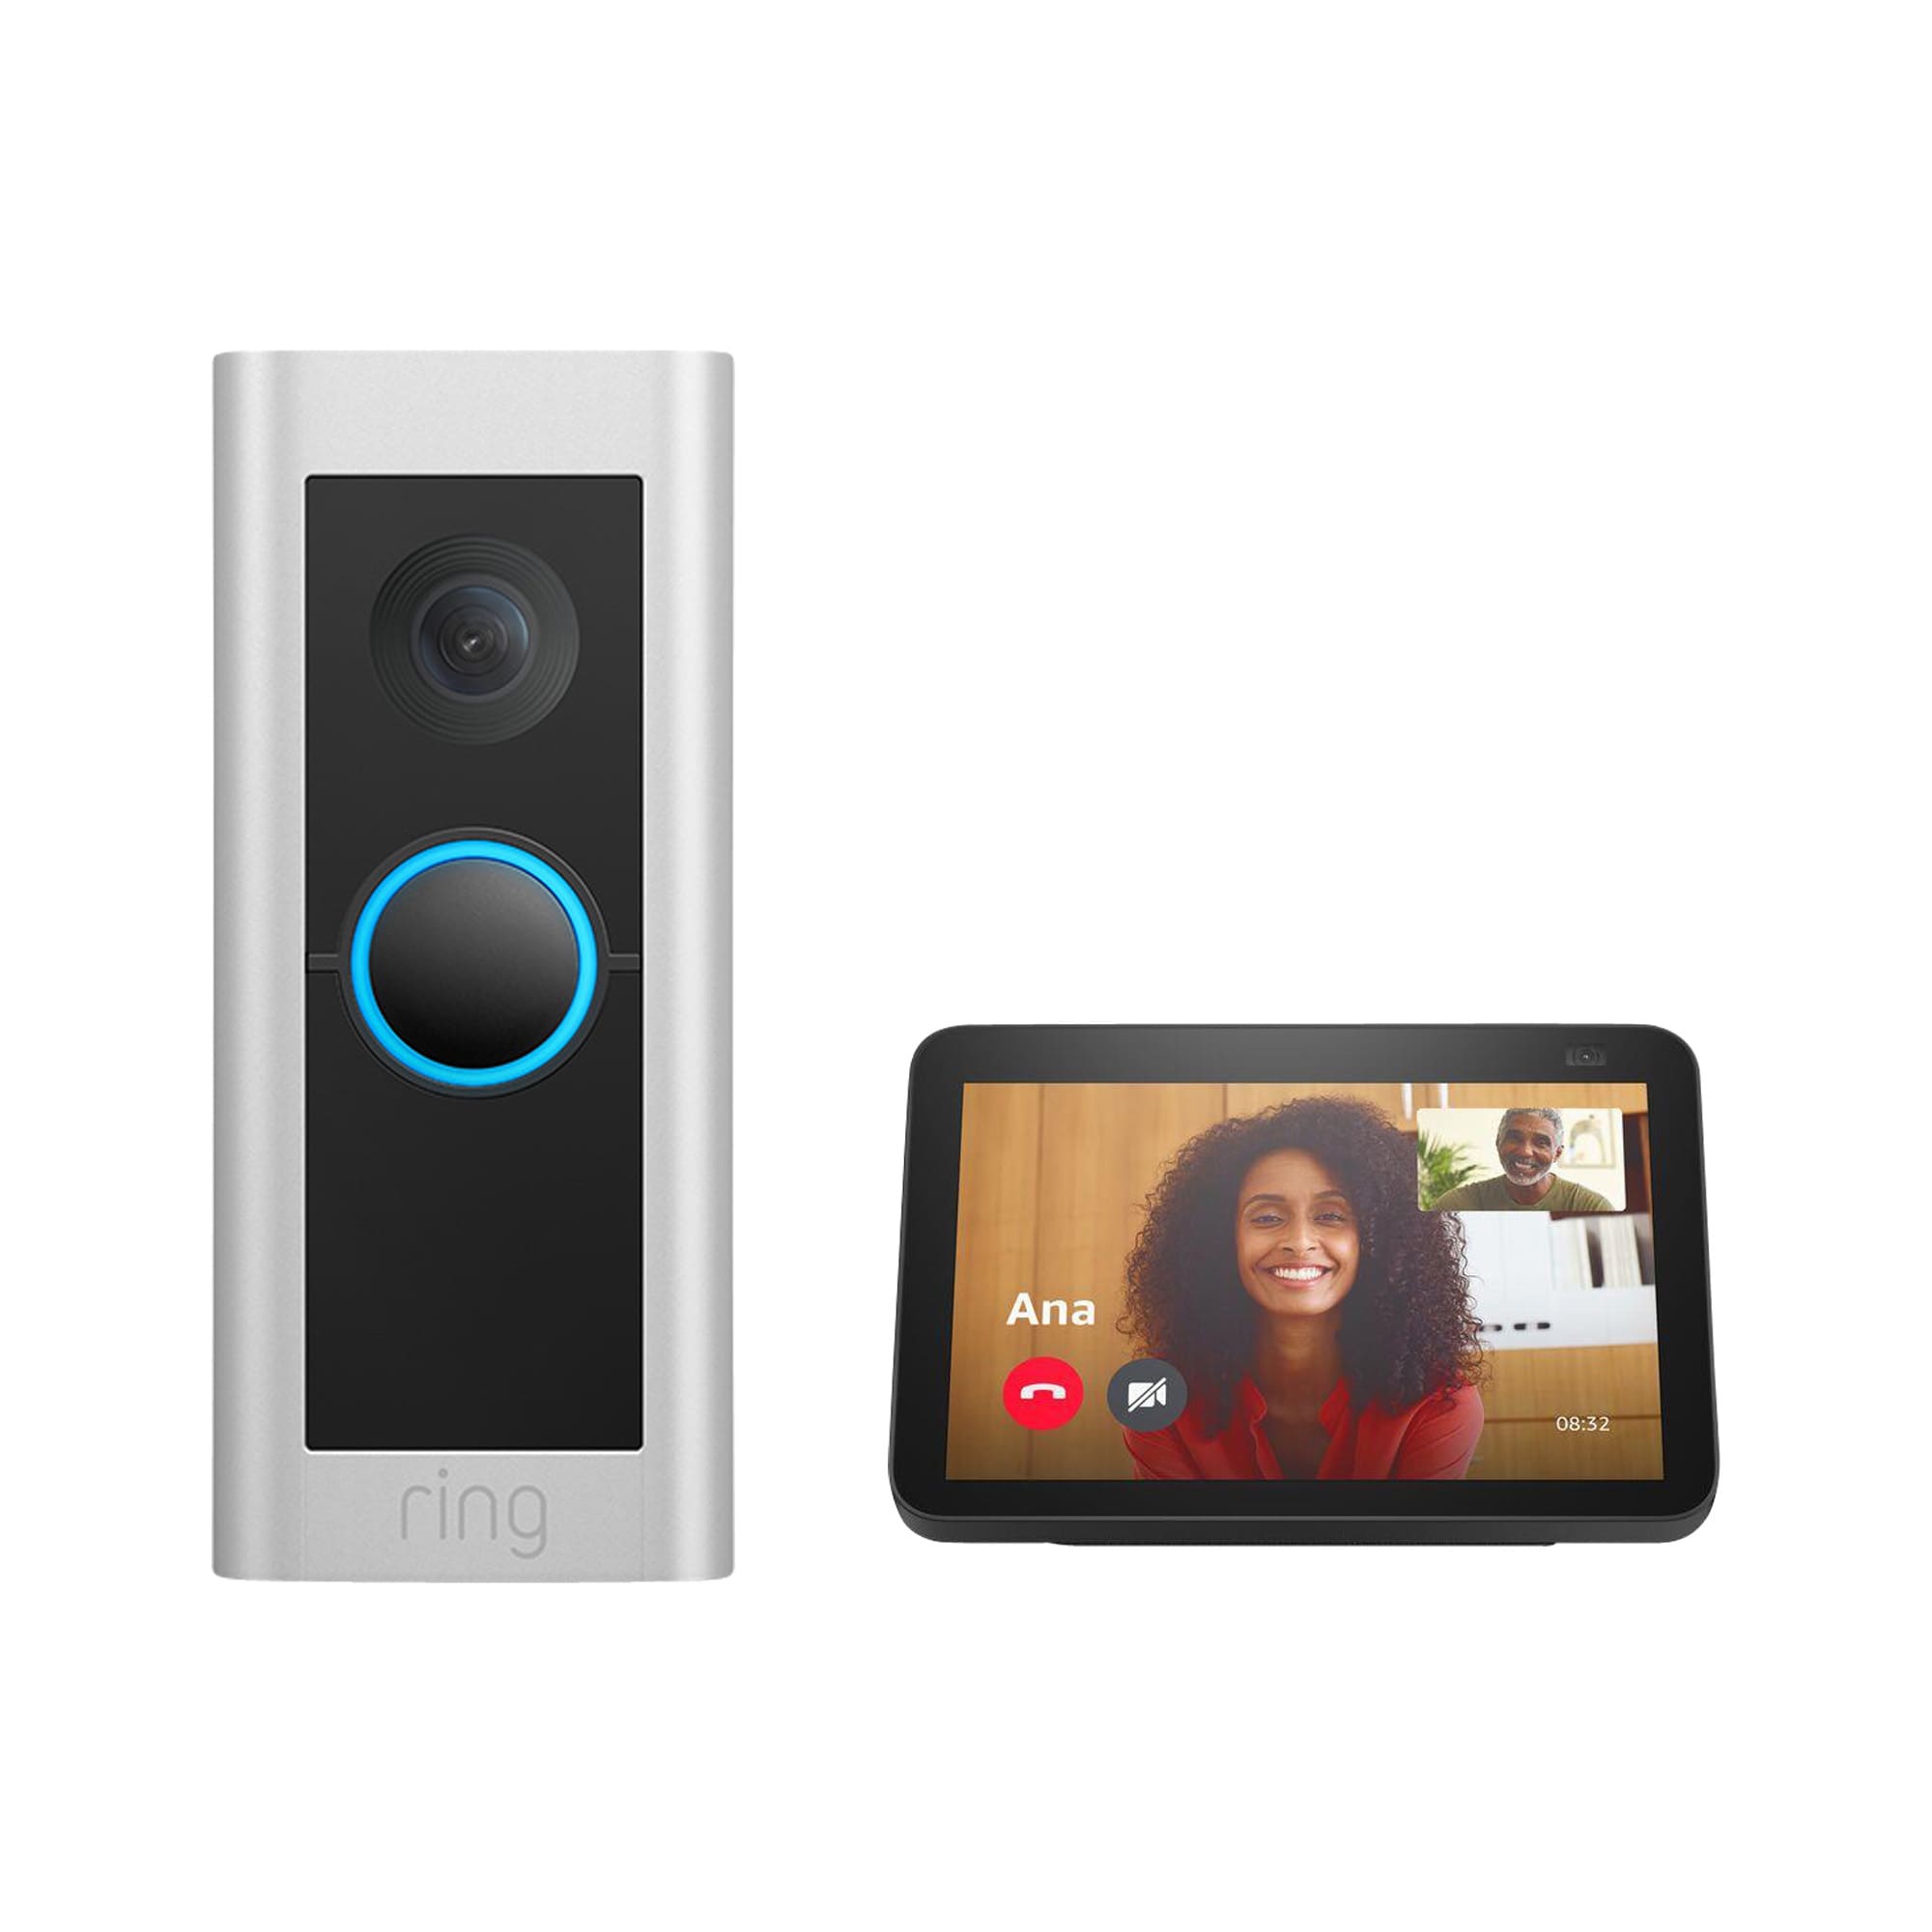 Blink Smart Wifi Video Doorbell – Wired/Battery Operated Black